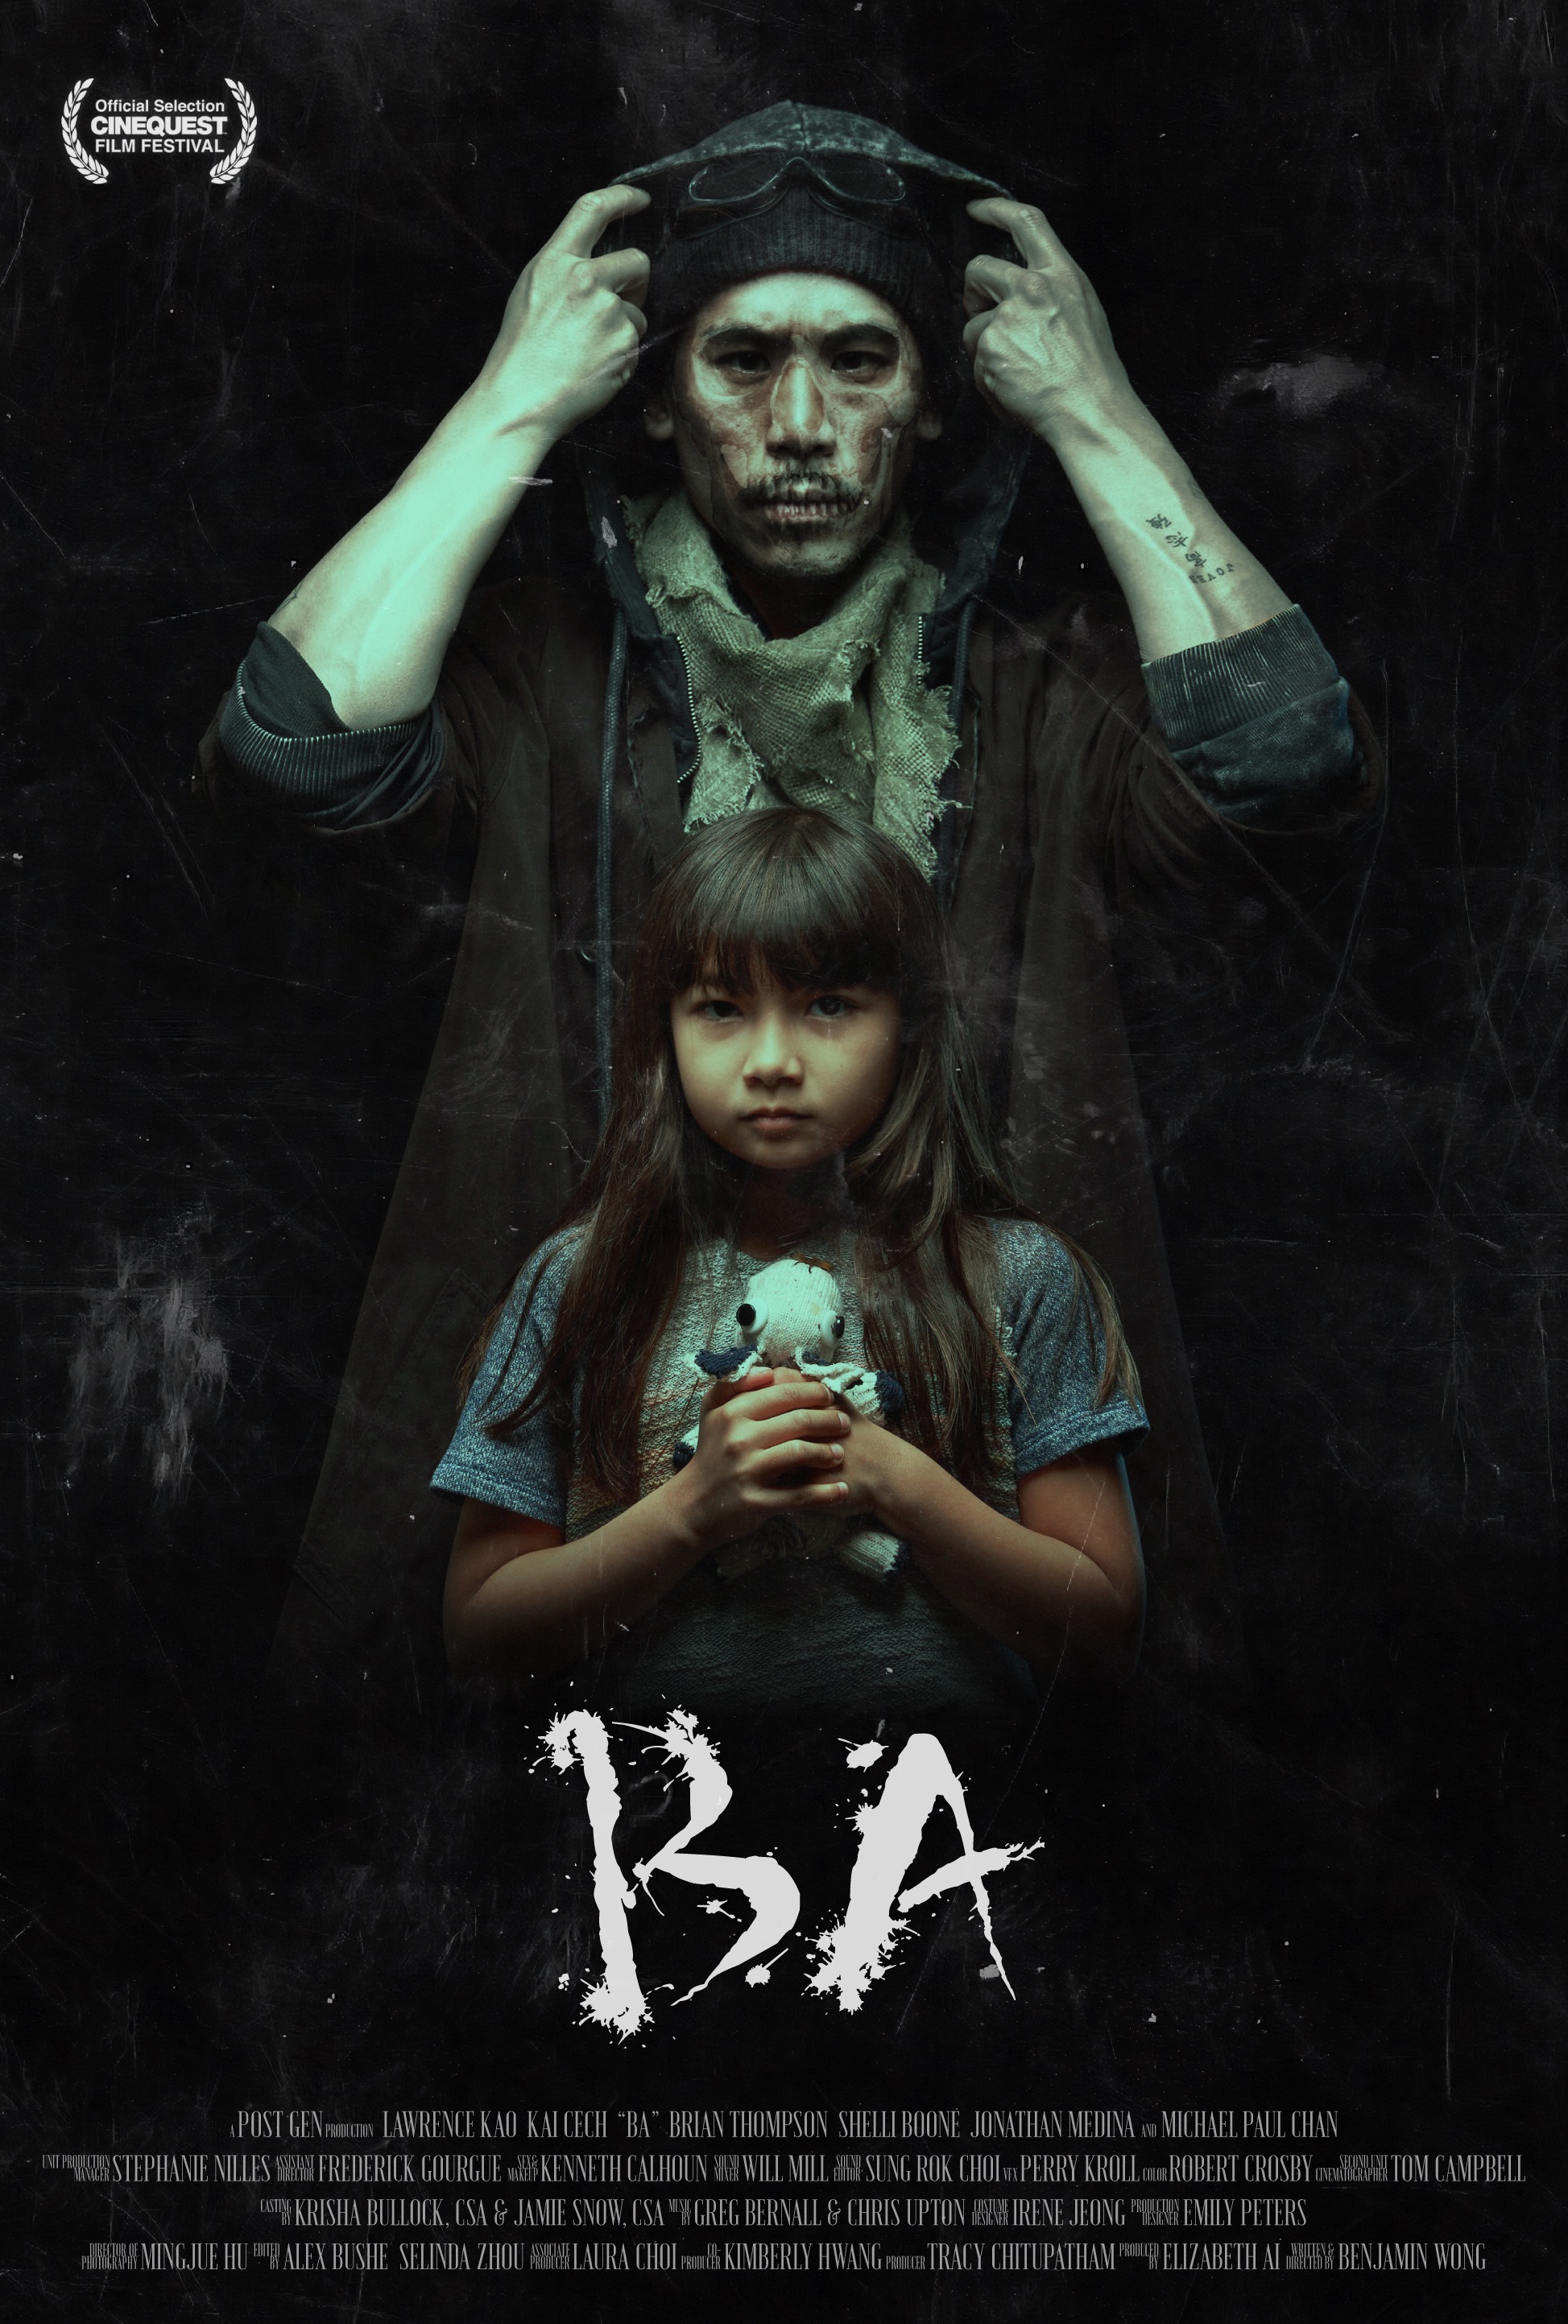 'Ba' Movie Poster - a dark, faded image of an ominous man looming over a girl holding a teddy bear.